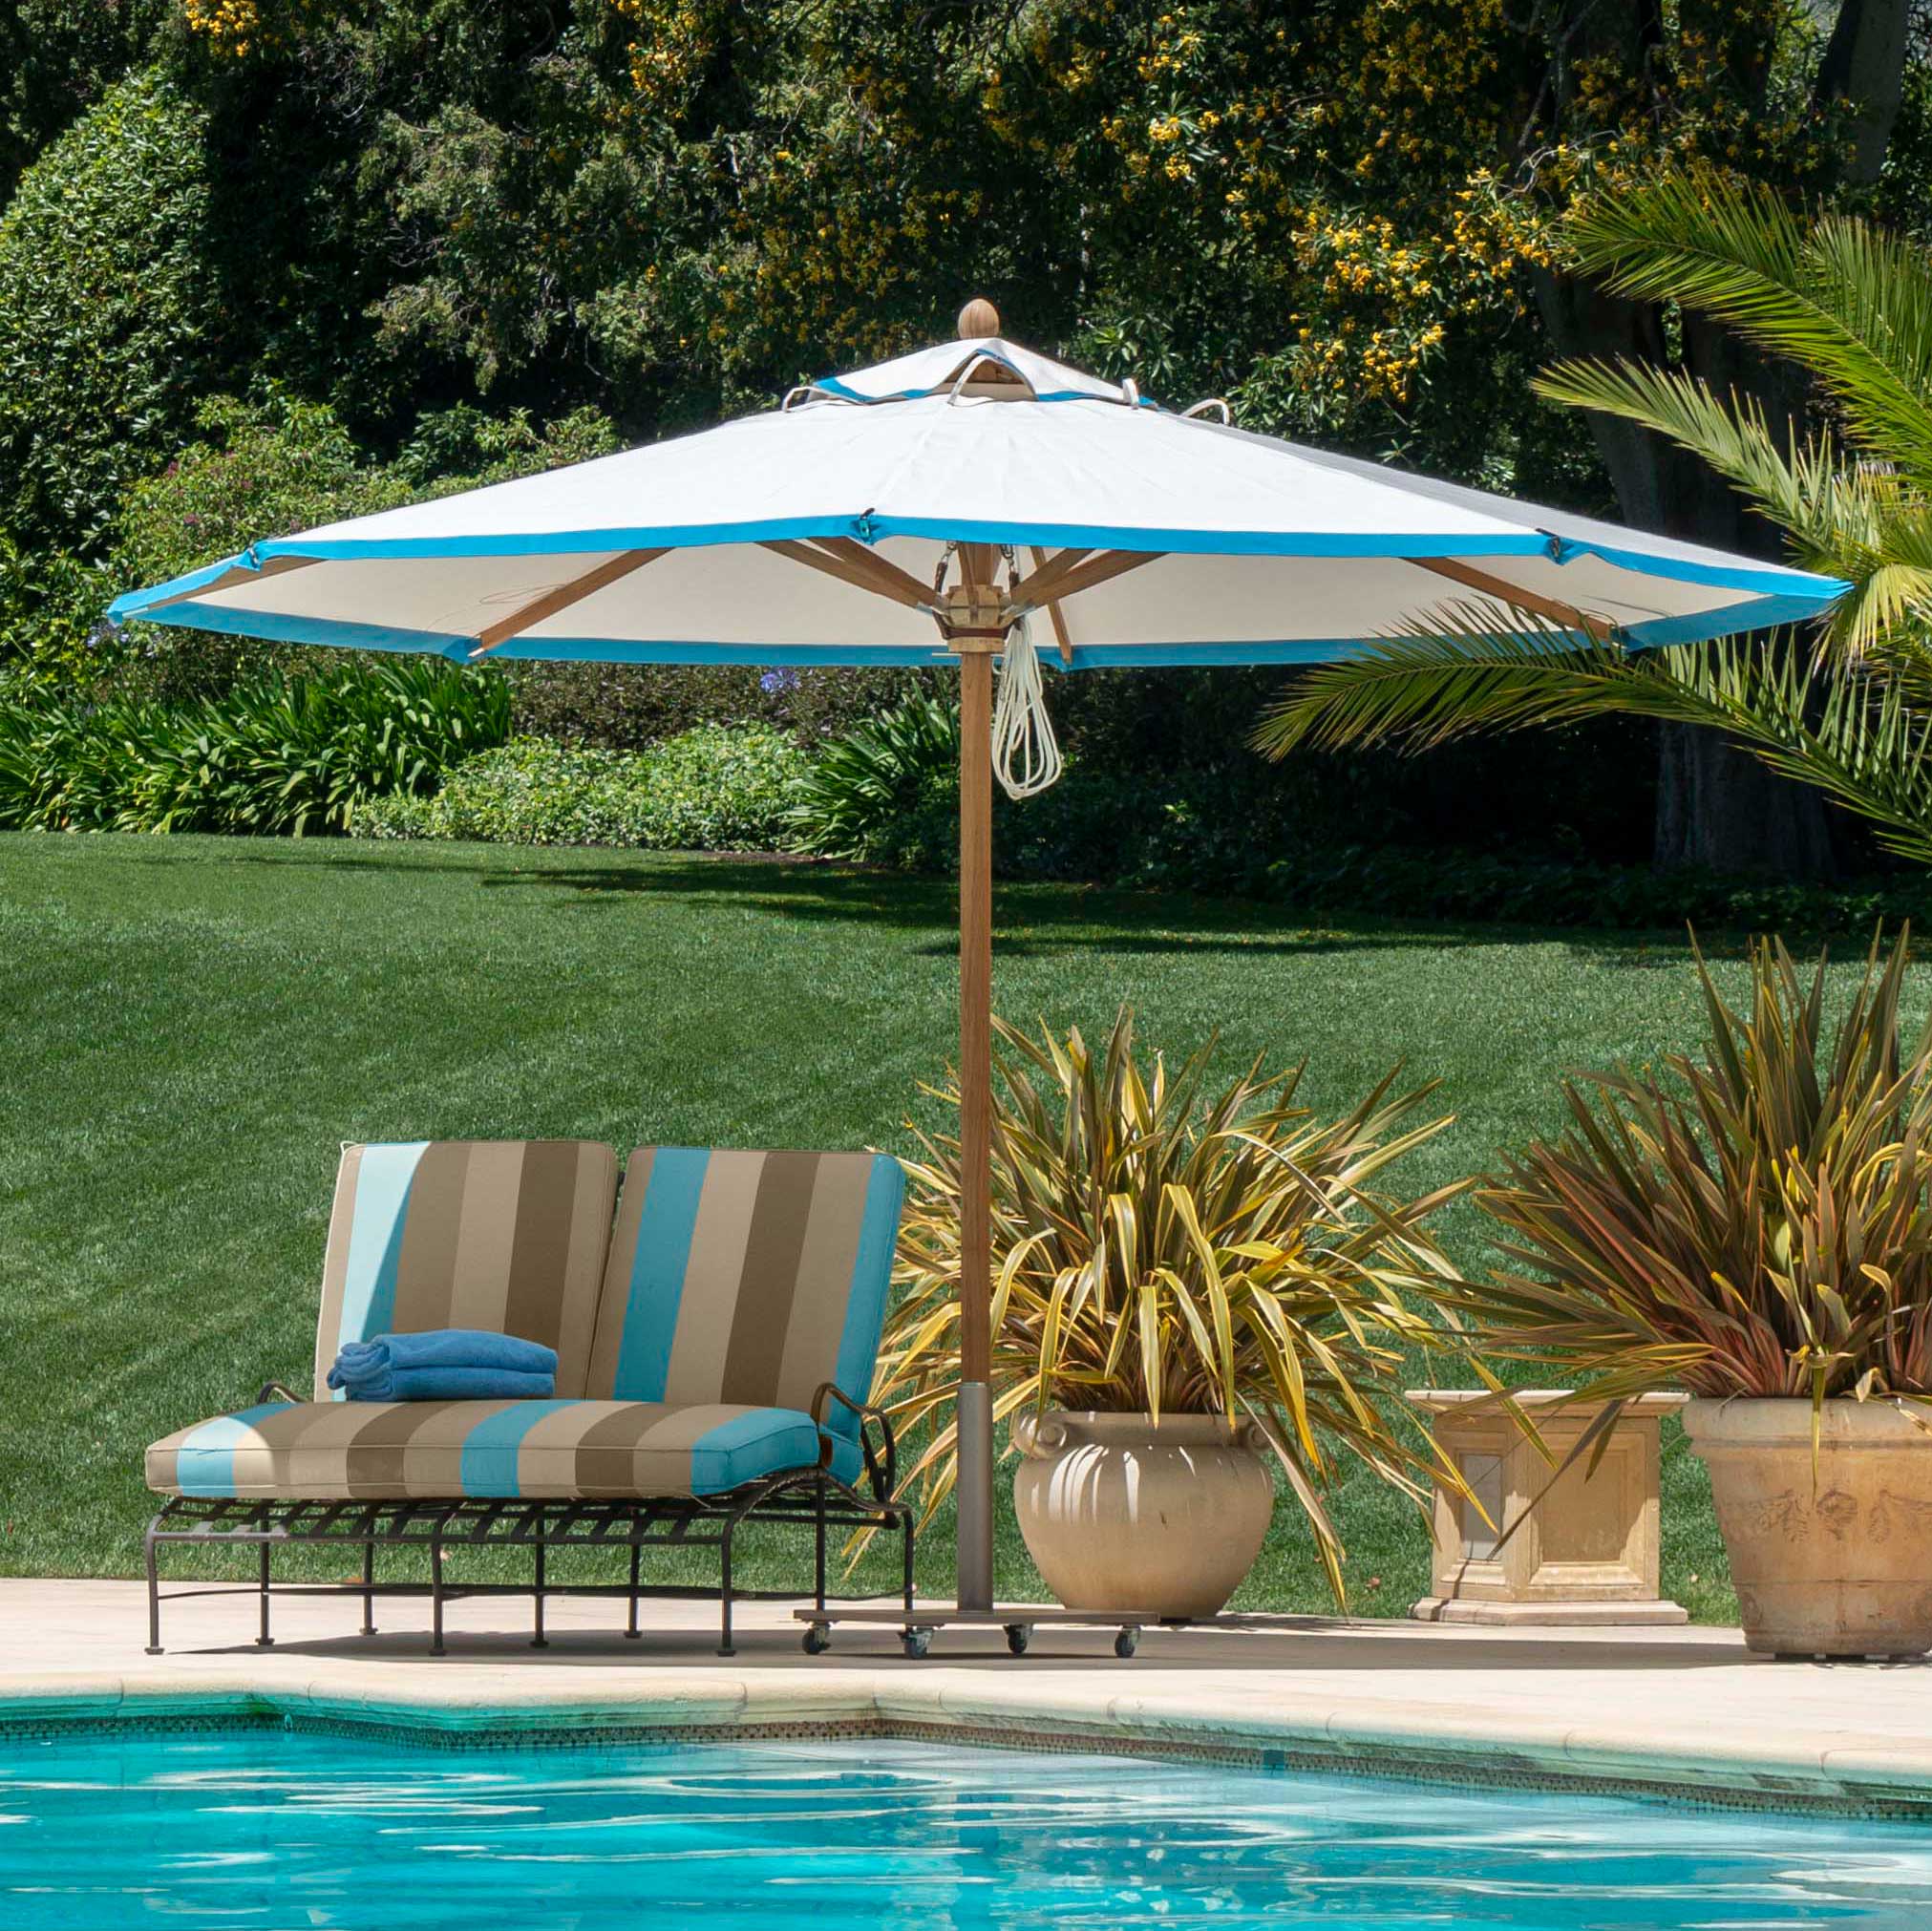 Image of umbrella with banding, poolside